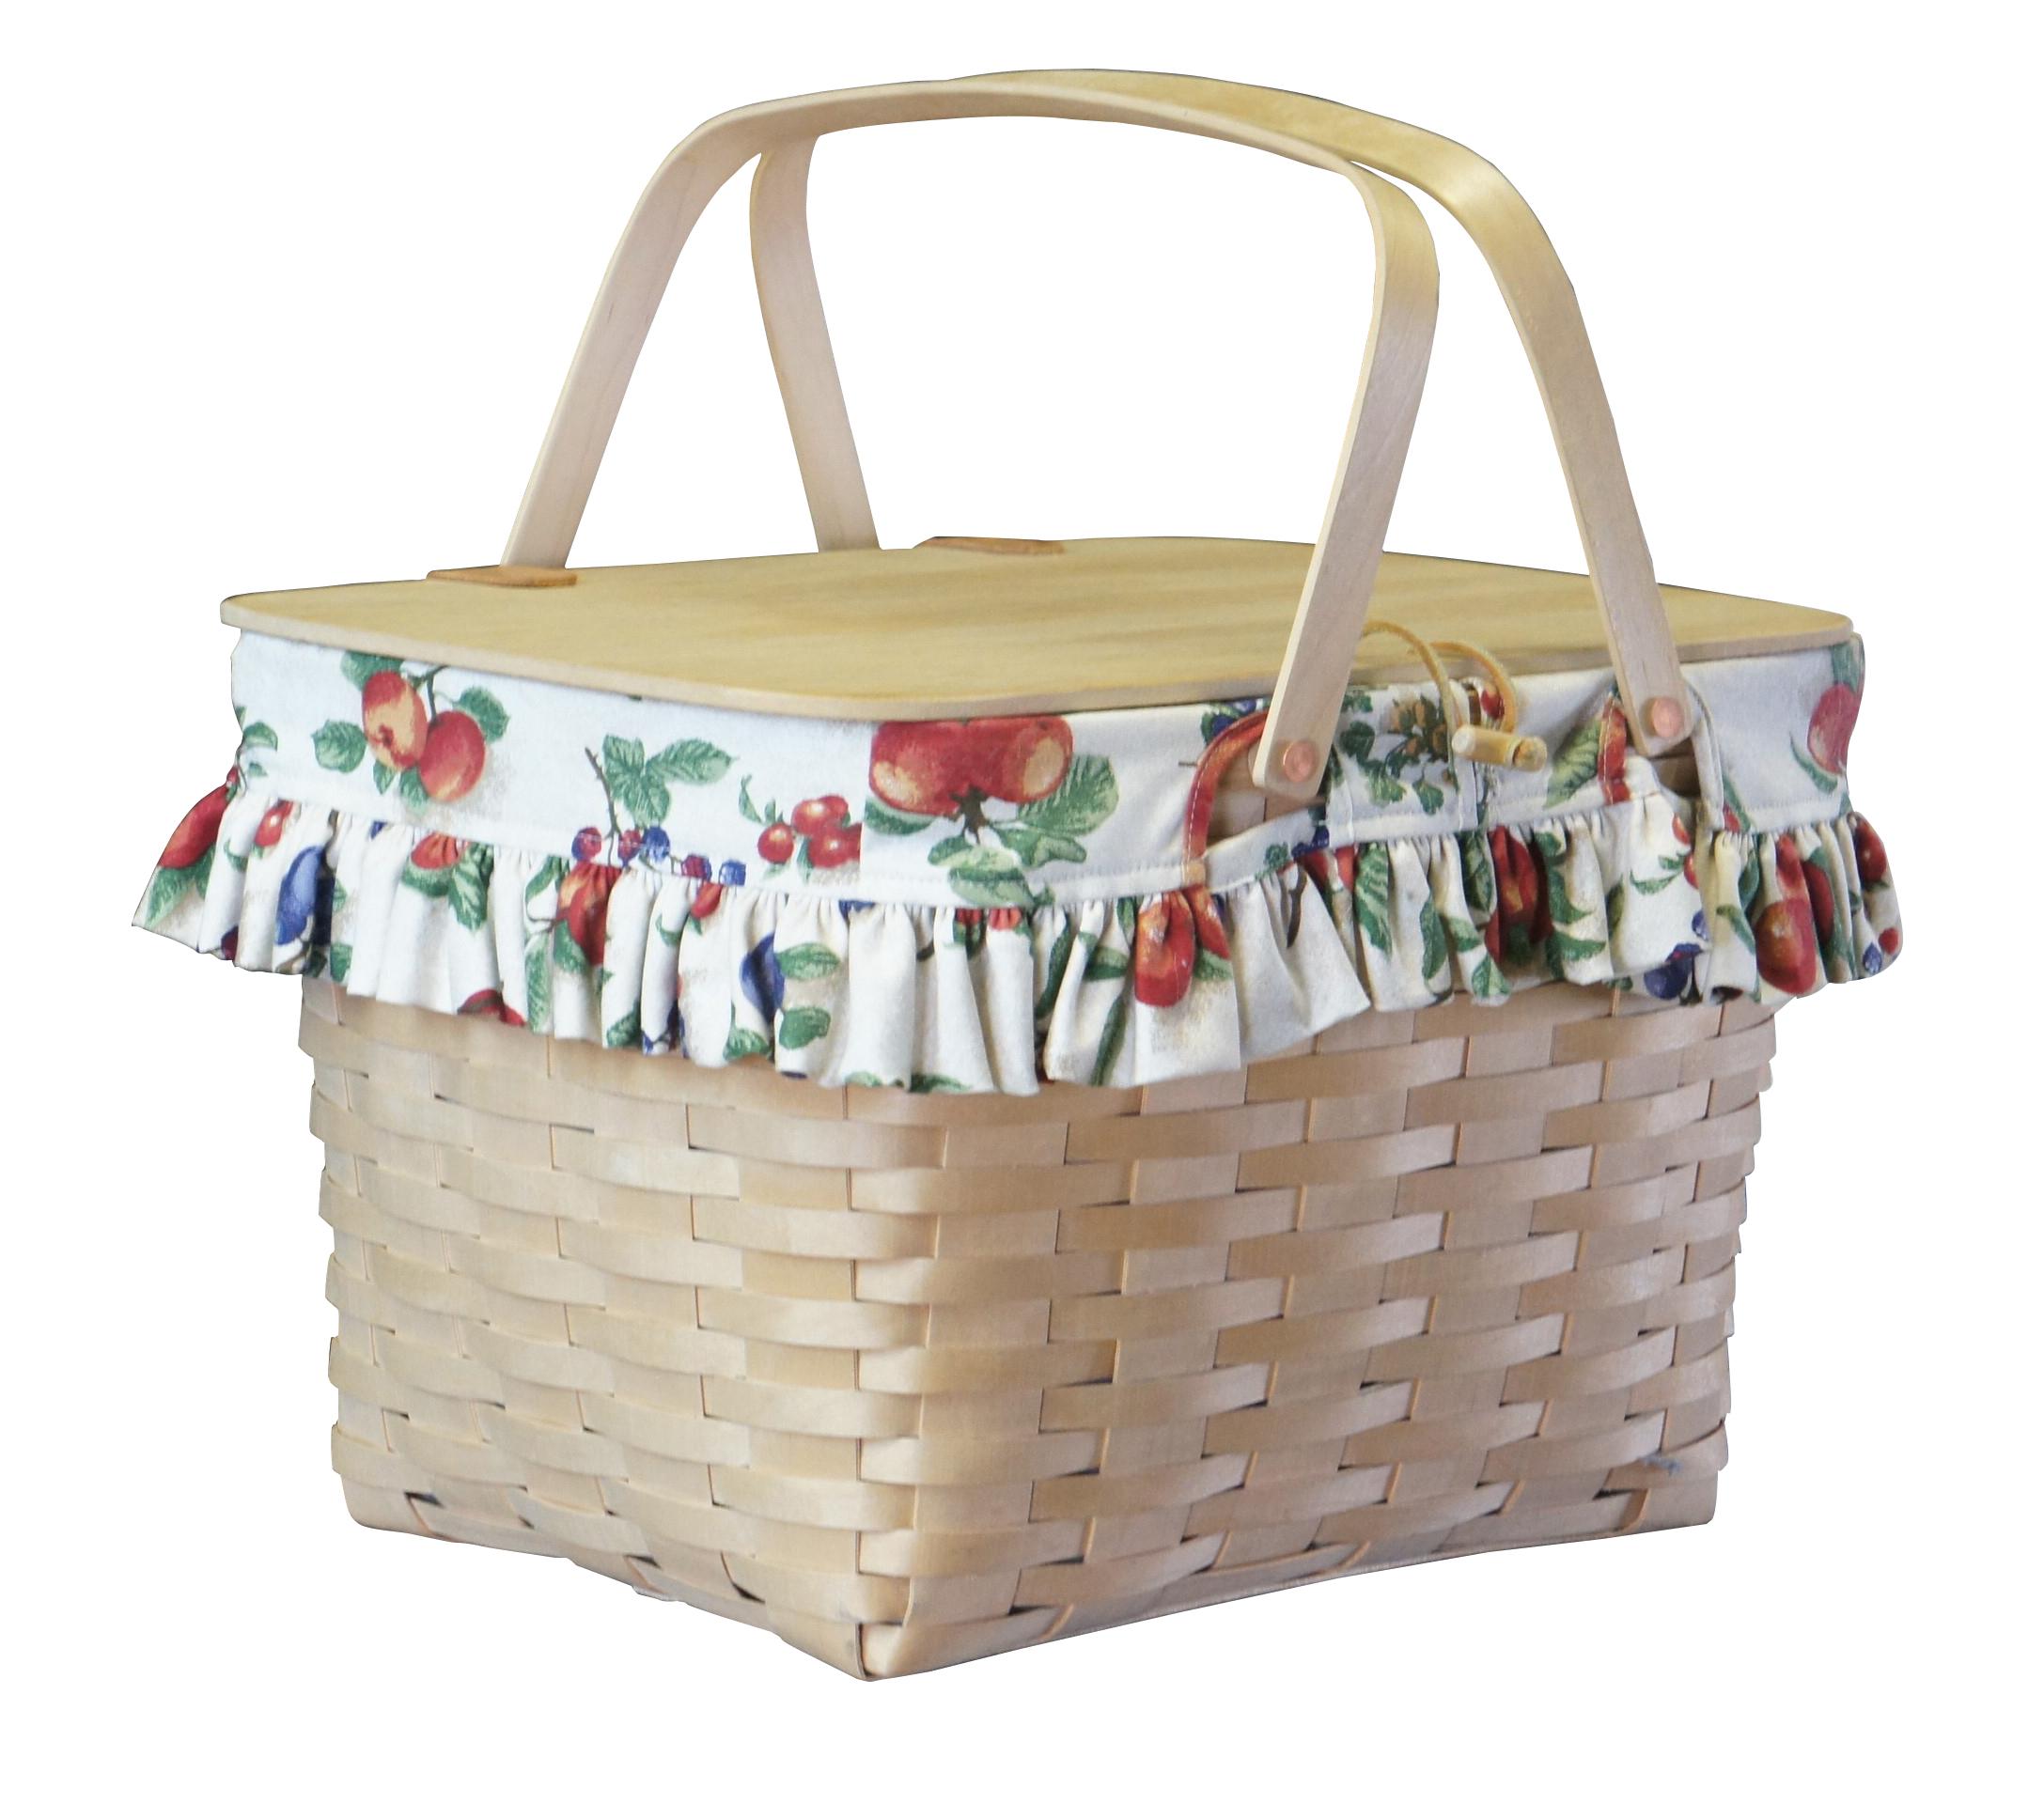 Longaberger woven hamper, circa 1998.  Features a floral liner, plastic insert and riser.  

DIMENSIONS

17